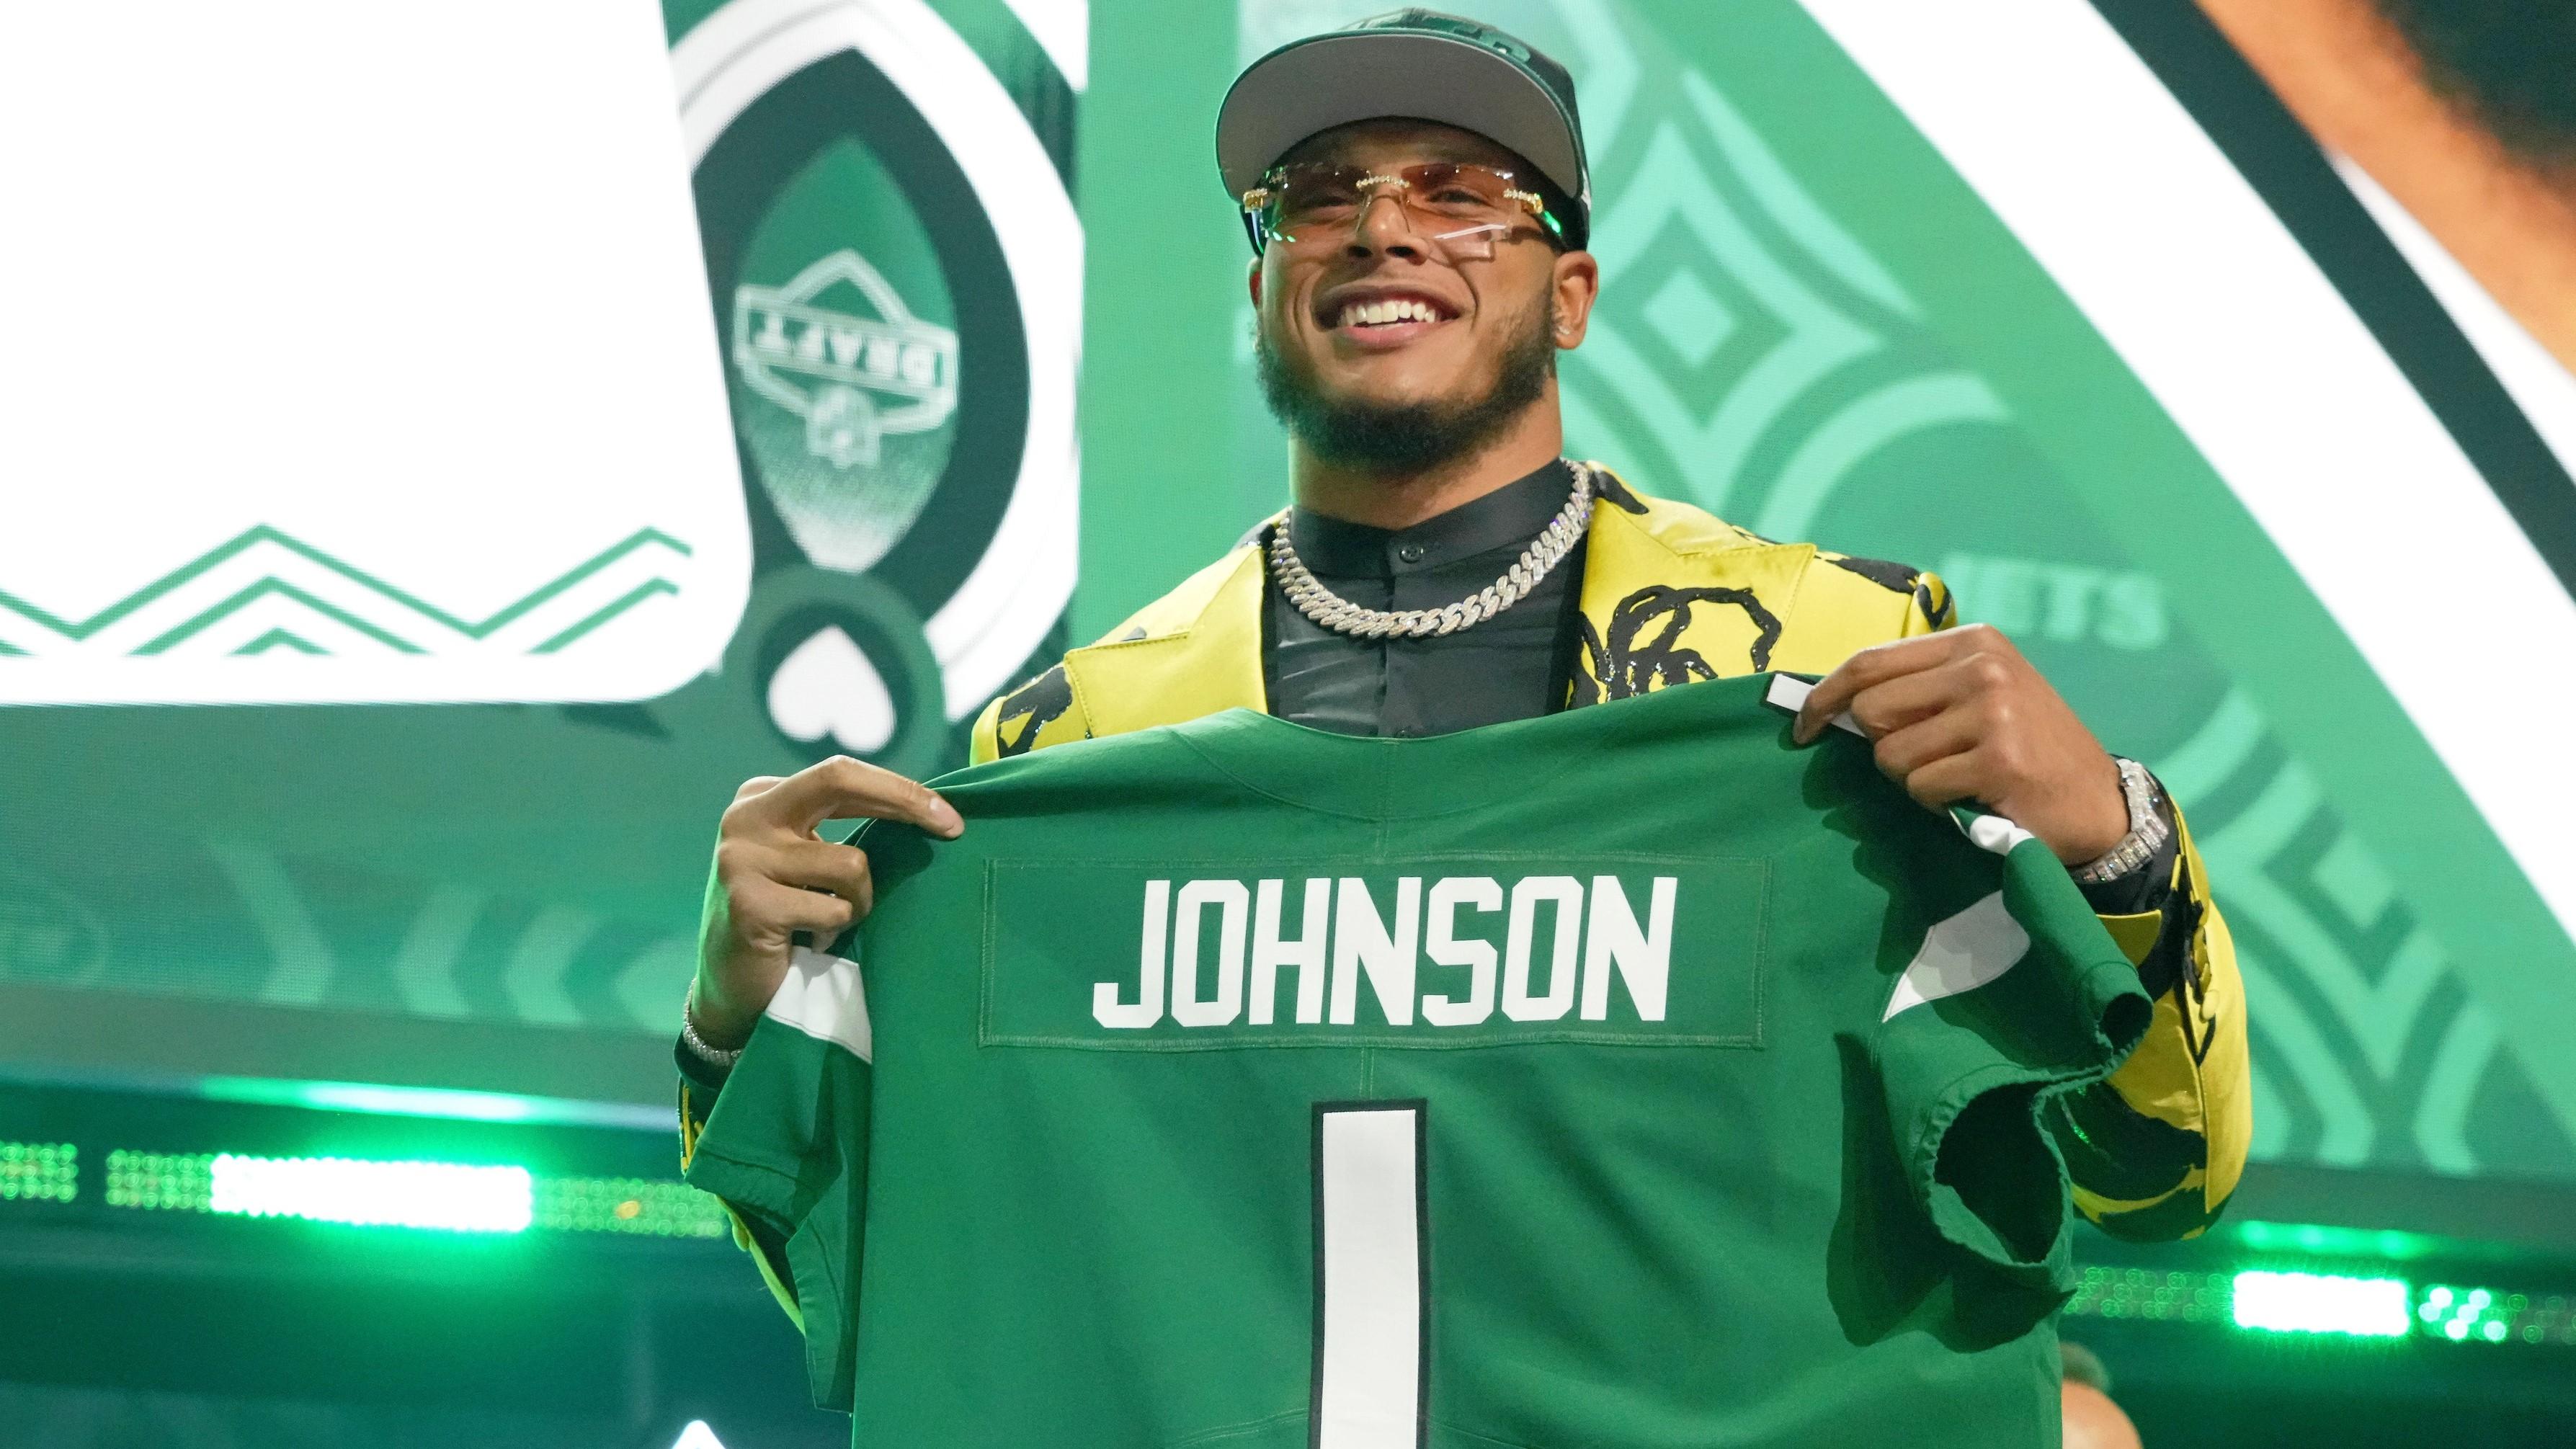 Apr 28, 2022; Las Vegas, NV, USA; Florida State defensive end Jermaine Johnson after being selected as the twenty-sixth overall pick to the New York Jets during the first round of the 2022 NFL Draft at the NFL Draft Theater. / Kirby Lee-USA TODAY Sports